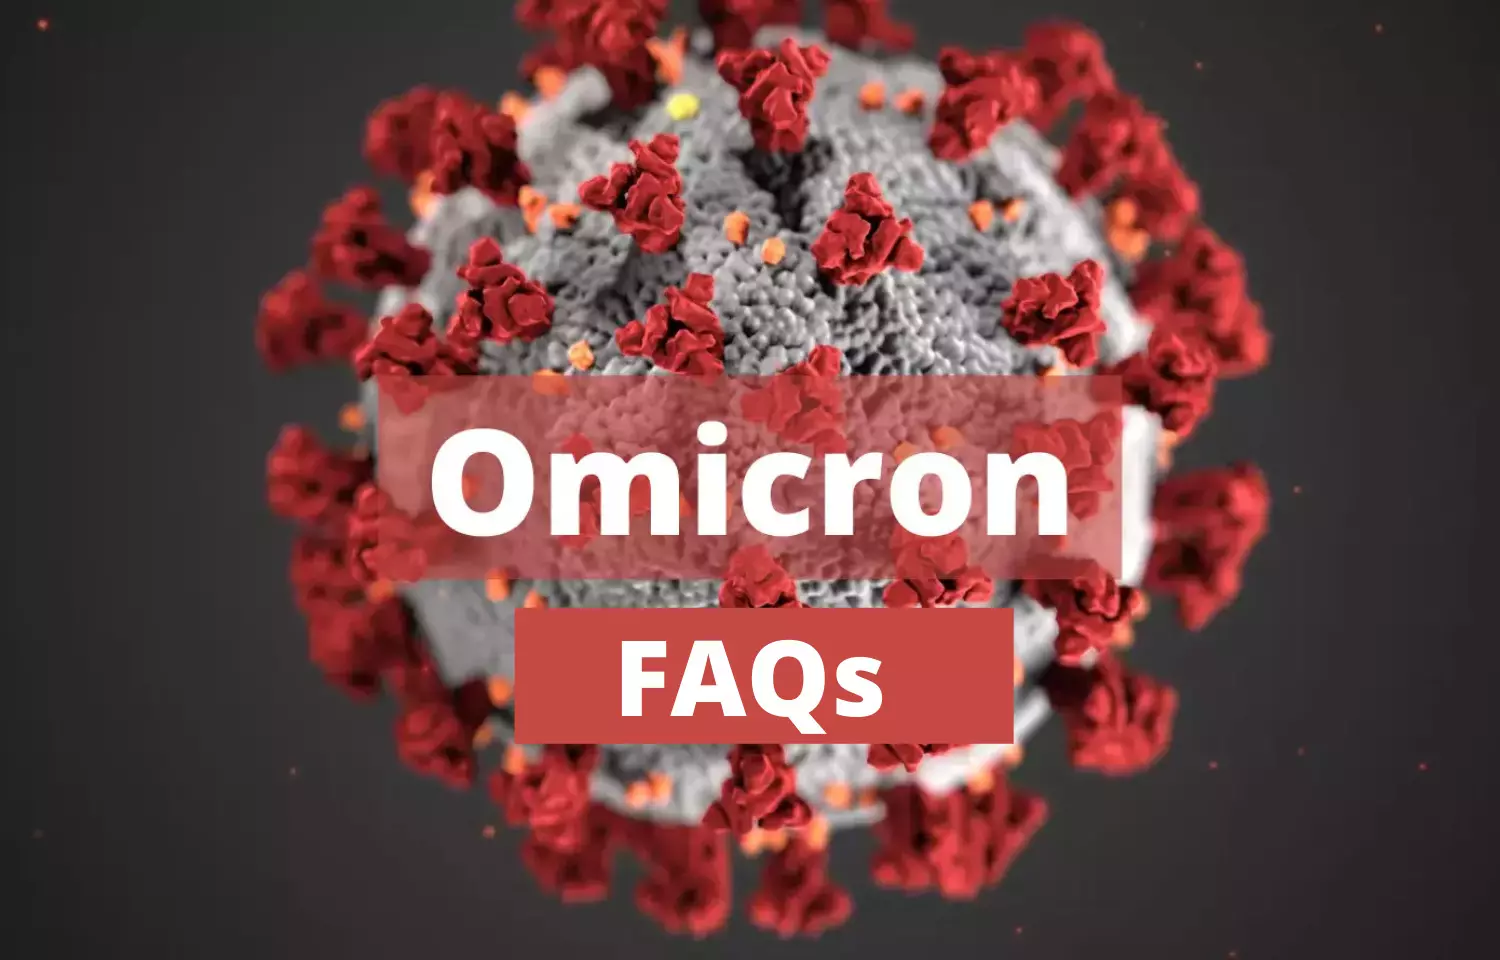 Will there be a third wave due to Omicron? Here is what health ministry has to say